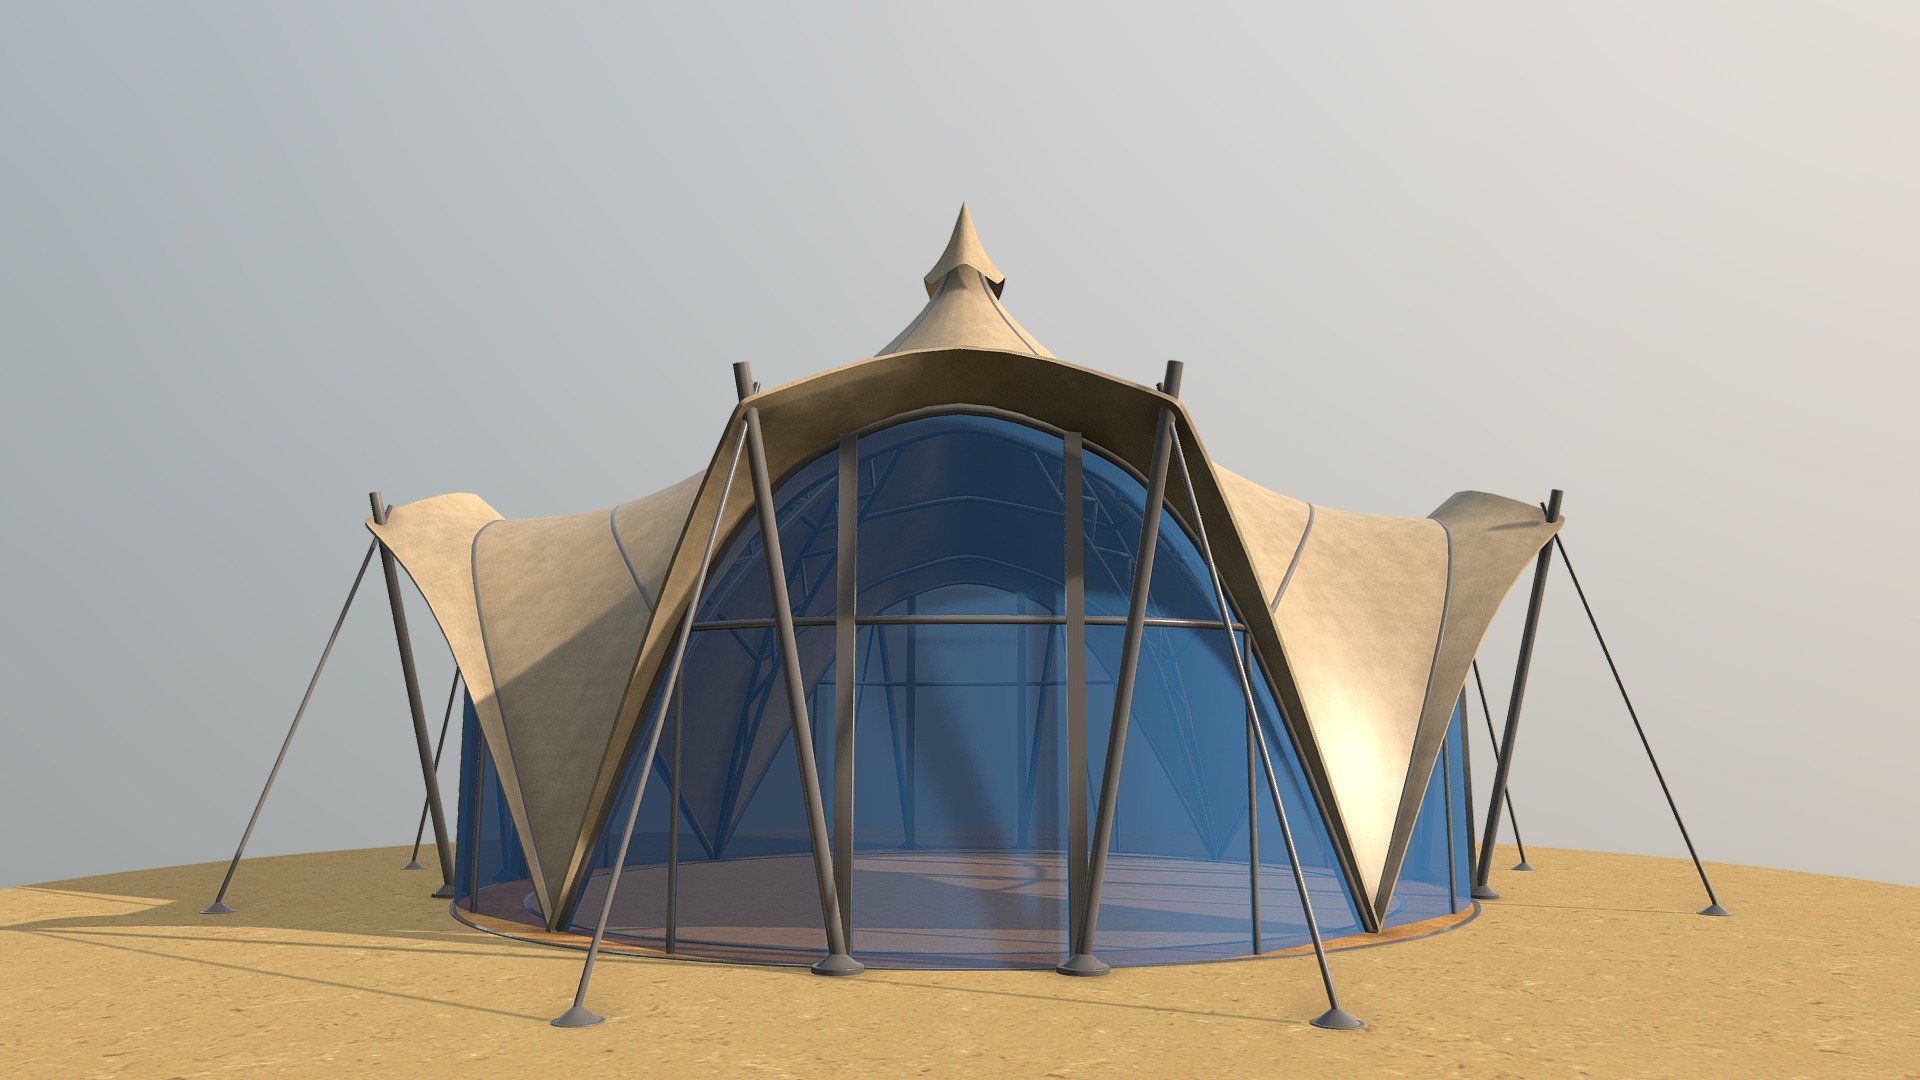 0202 - Circular Tent.

Native Format File: 3Ds Max 2020 - Rendering by Vray Next.

3Ds Max Save as 3Ds Max 2017 with Converted all objects to Editable Poly.

3Ds Max Save as 3Ds Max 2020 ( Standard Materials ) with Converted all objects to Editable Poly.

Blender format file is available.

Exporting Formats: Autodesk FBX ( .fbx ), OBJ ( obj, mtl ), usdz, glb, gltf, 3DS, DAE..

All 8 texture maps are included as JPG.

Support 24/7 3d model